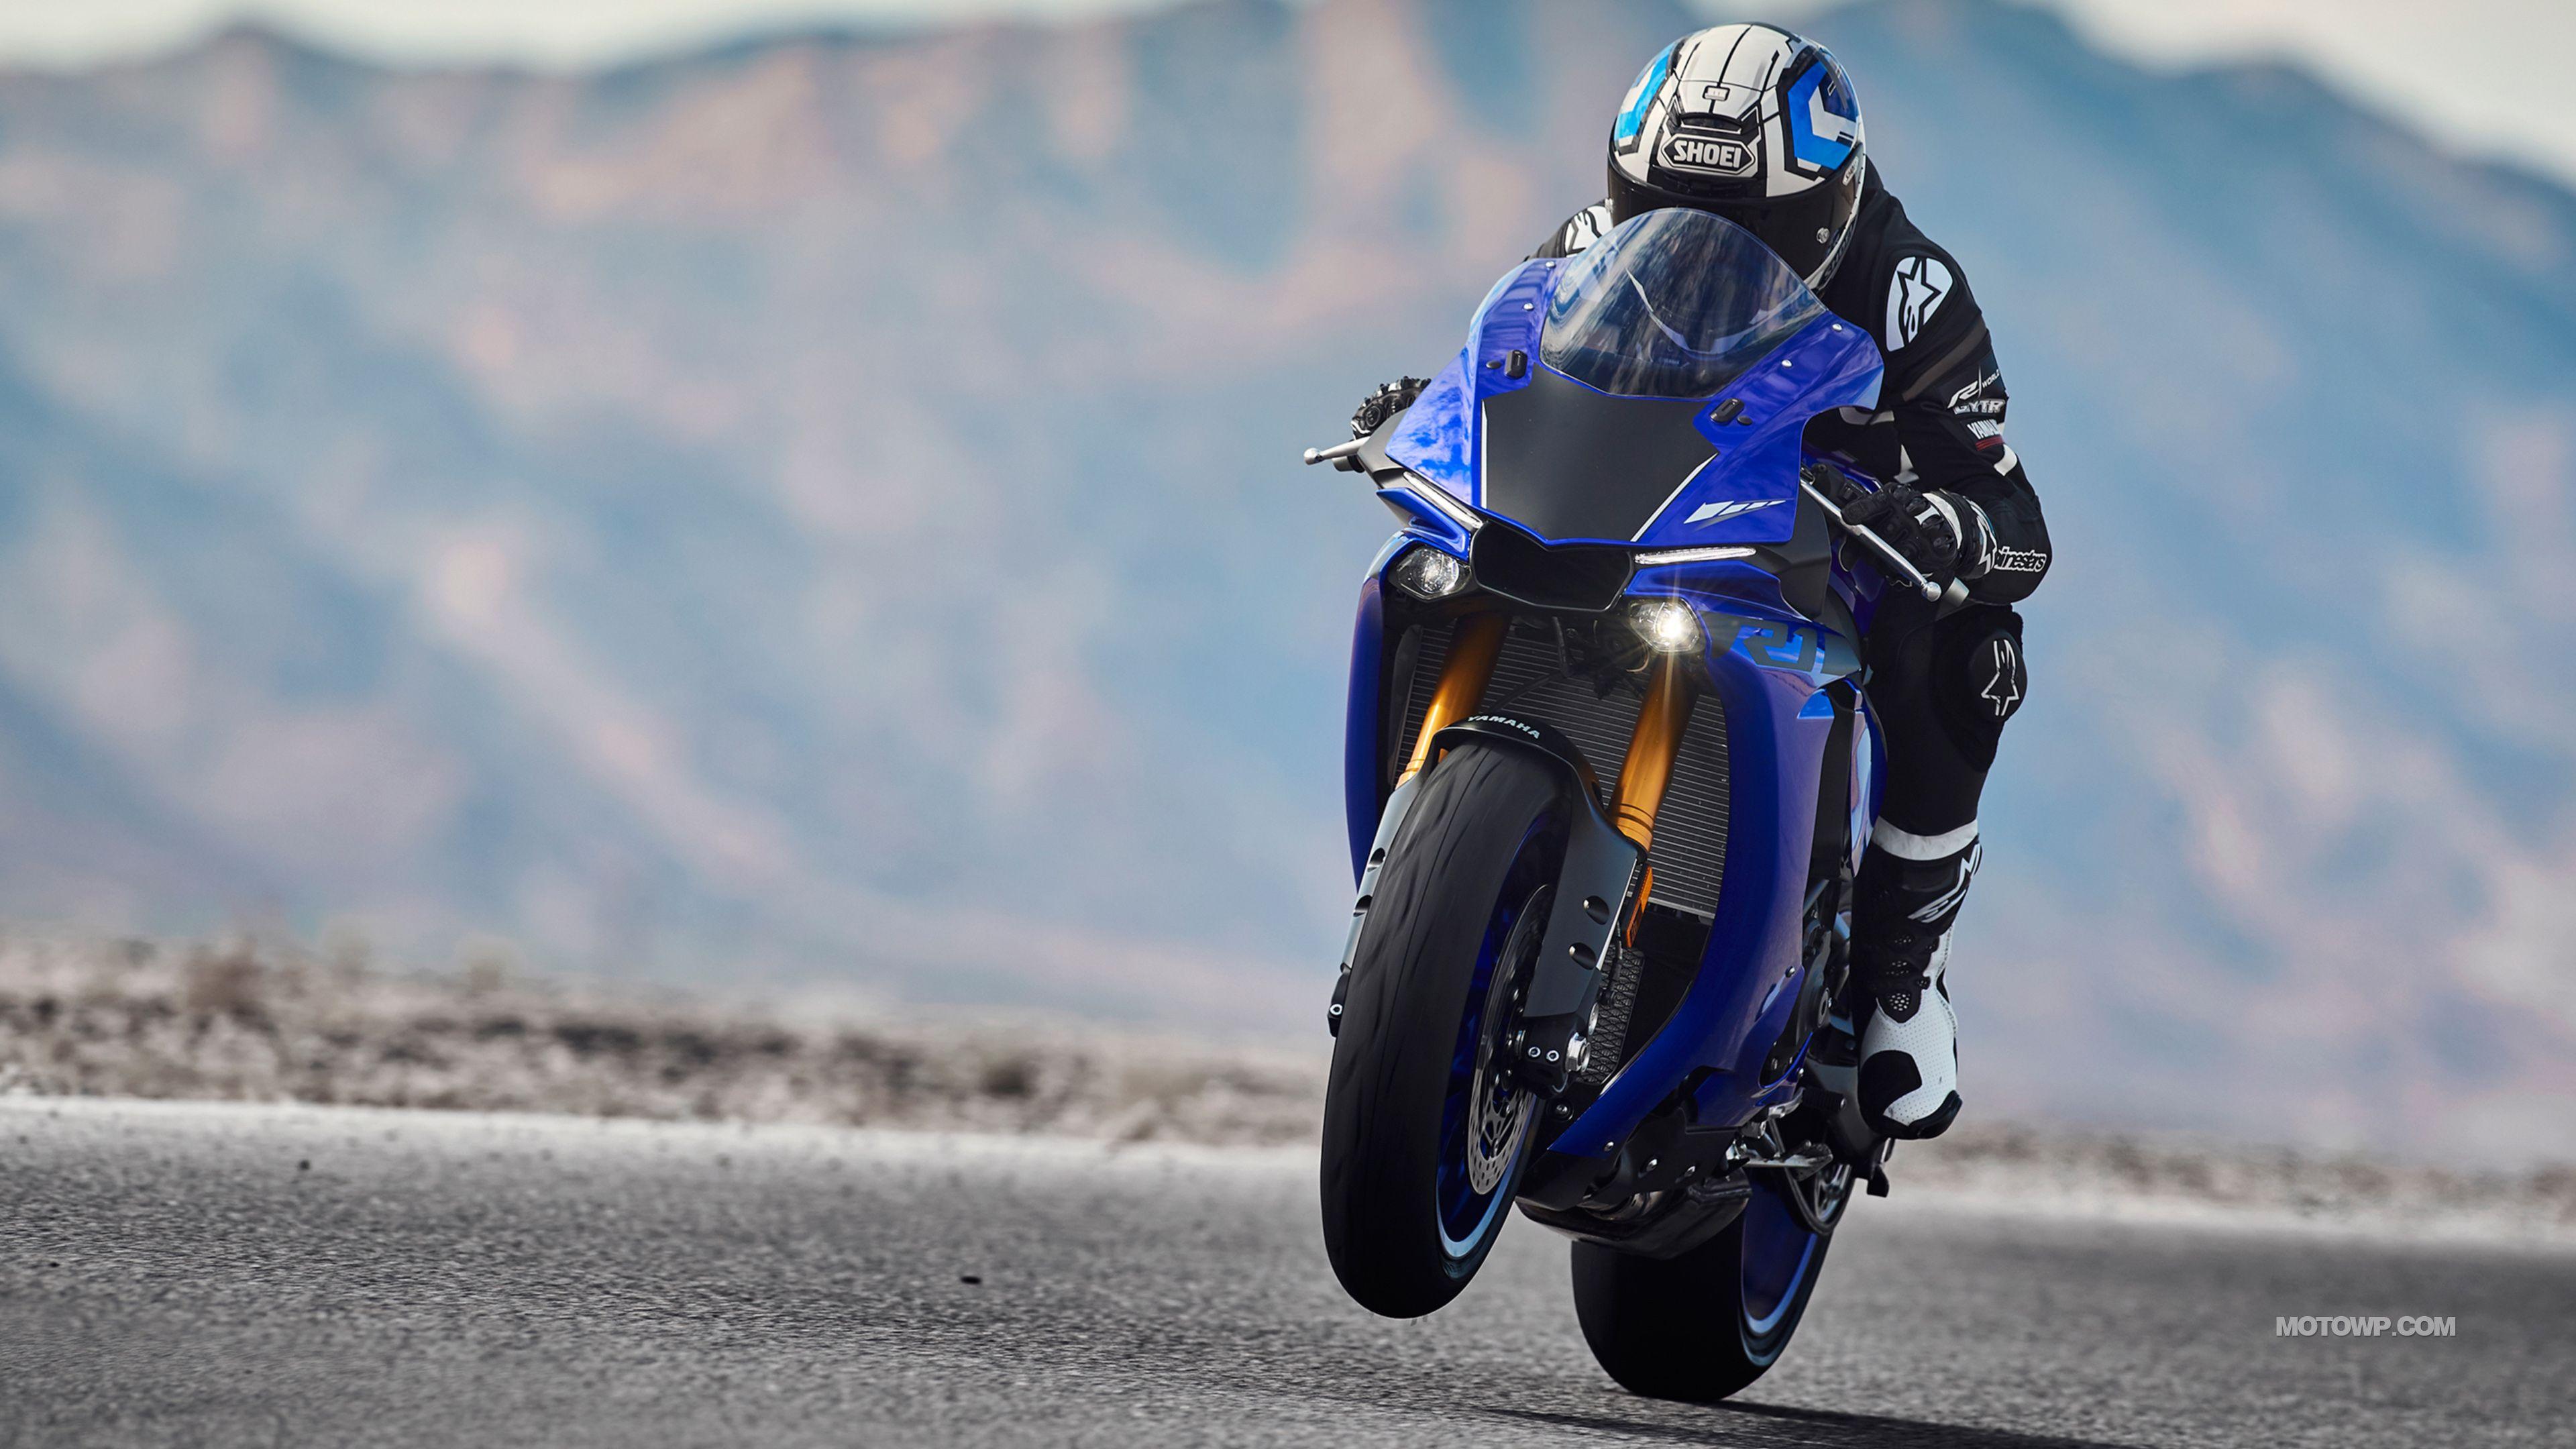 yamaha r1» 1080P, 2k, 4k HD wallpapers, backgrounds free download | Rare  Gallery